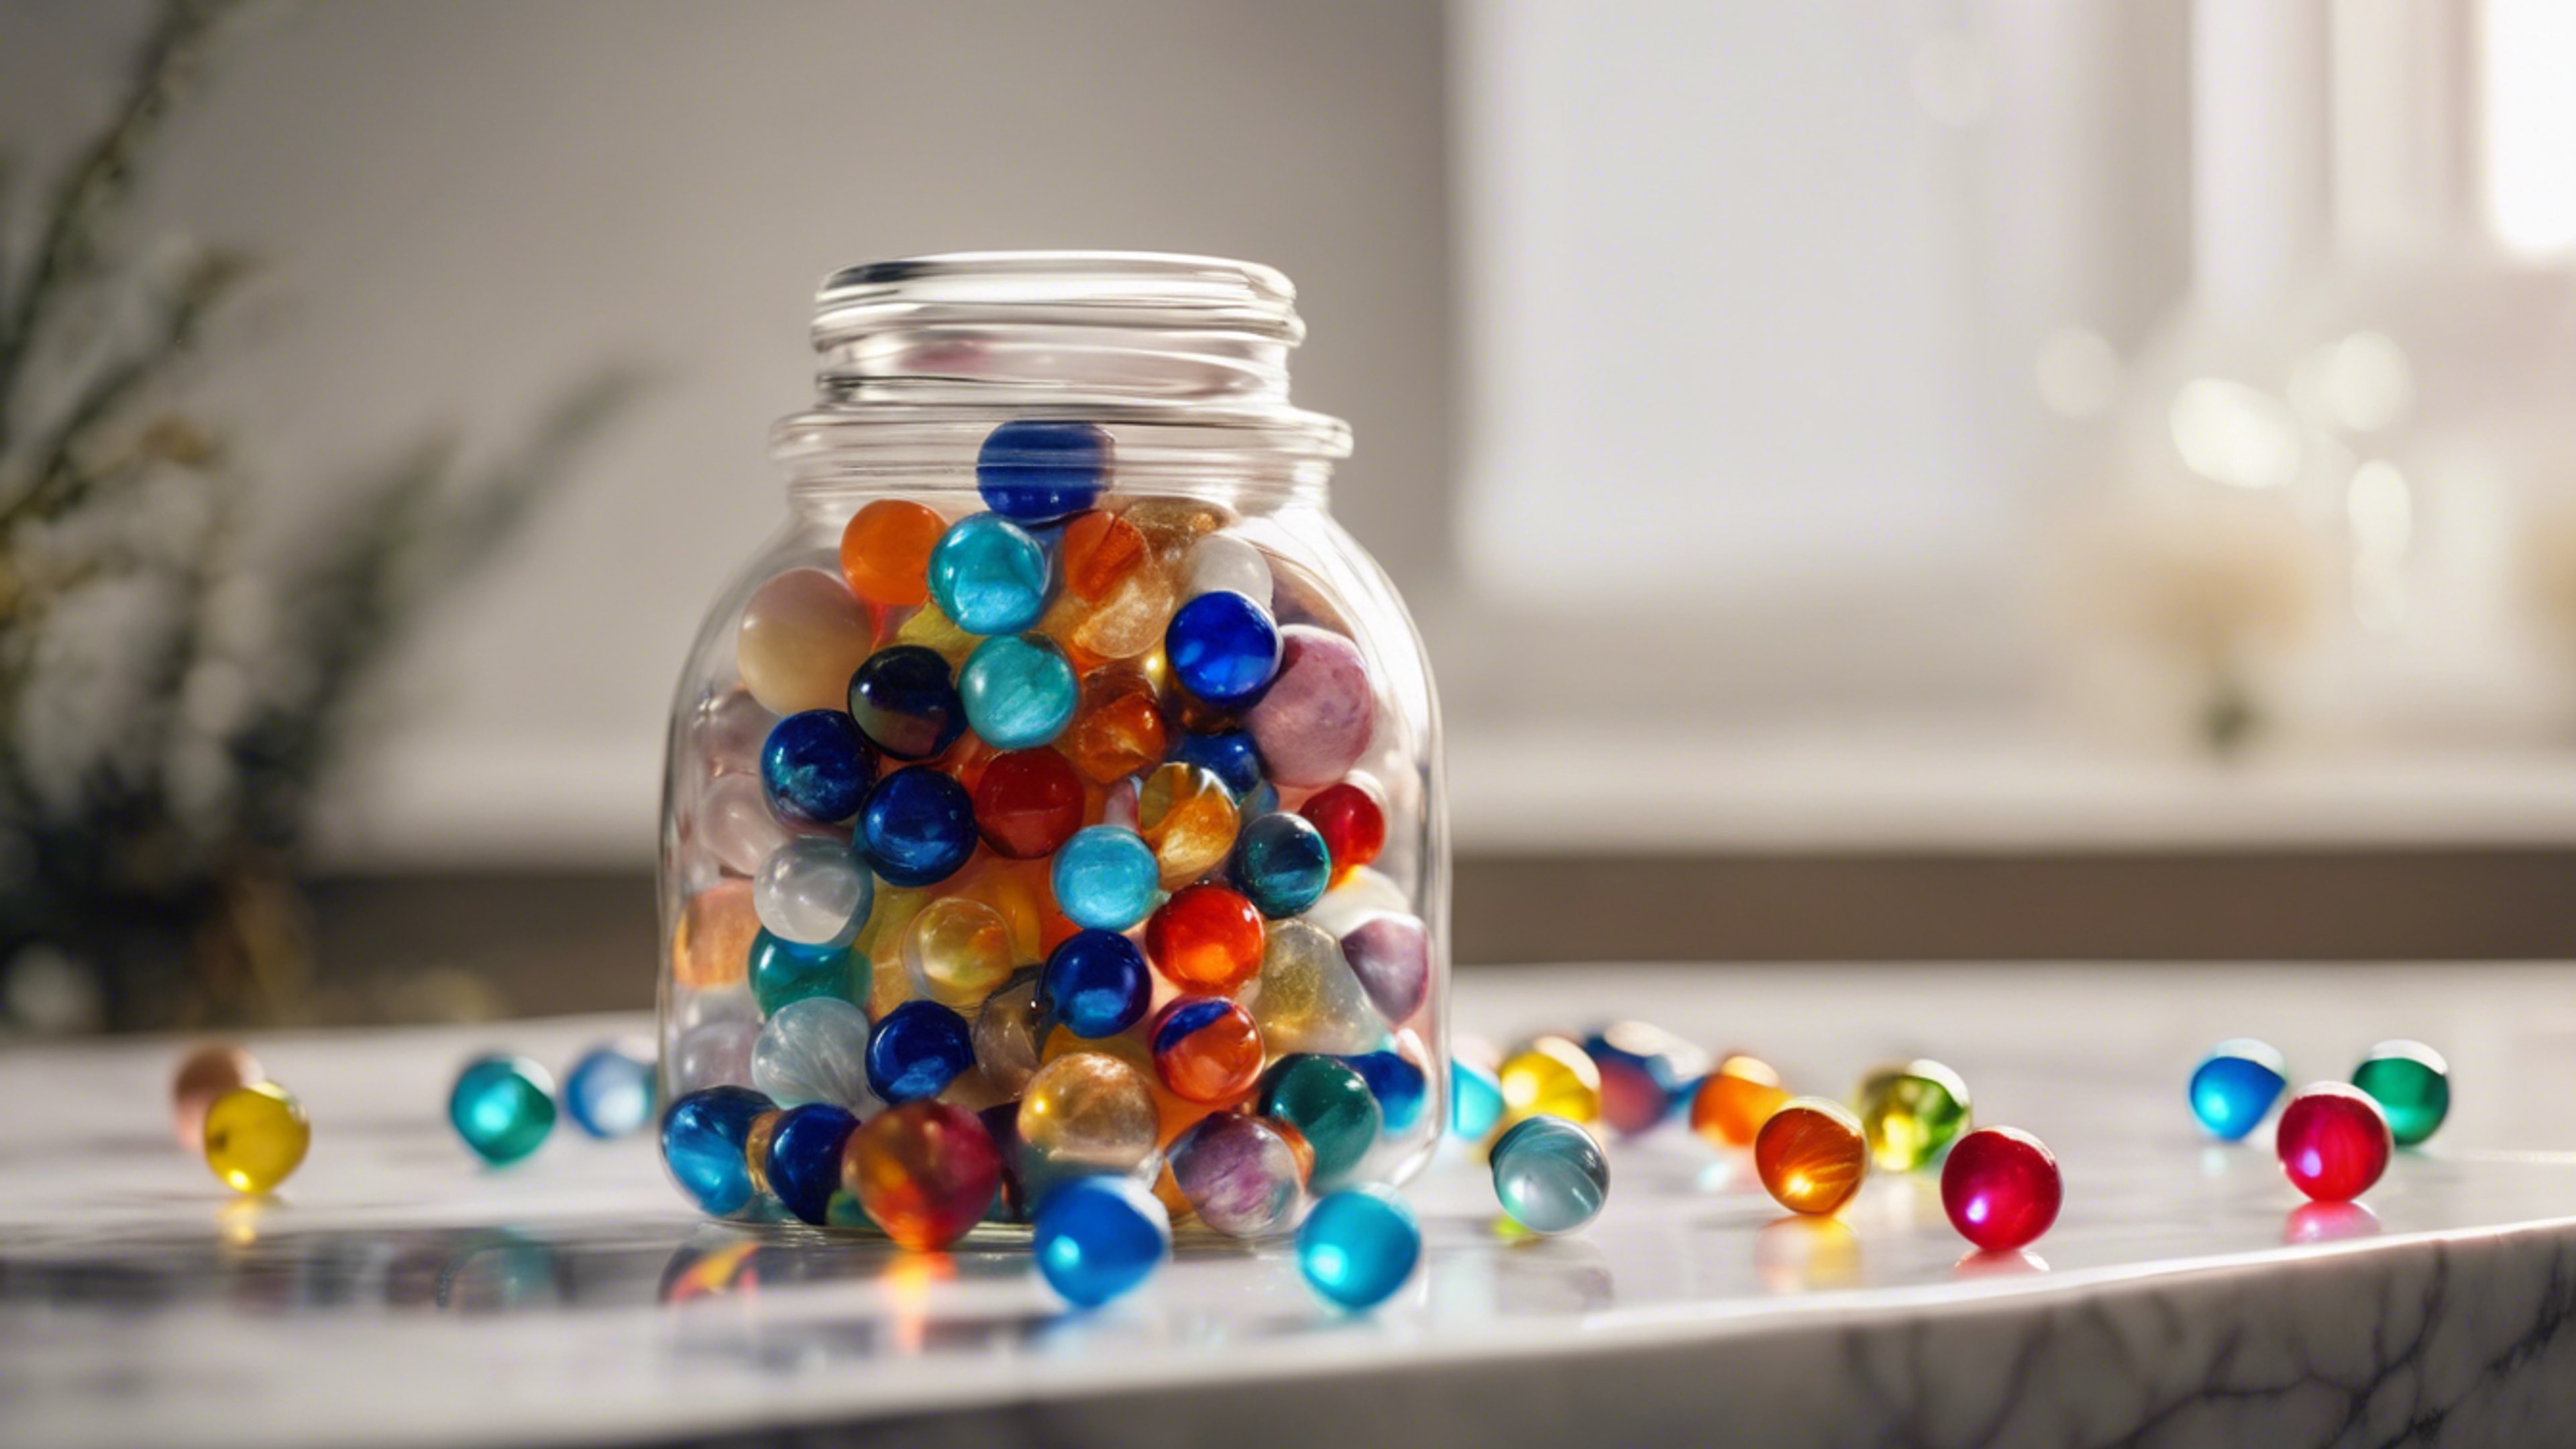 A glass jar full of colorful marbles with glinting lights around them, placed on a white marble surface. Ფონი[9438bf9259b84d3ca042]